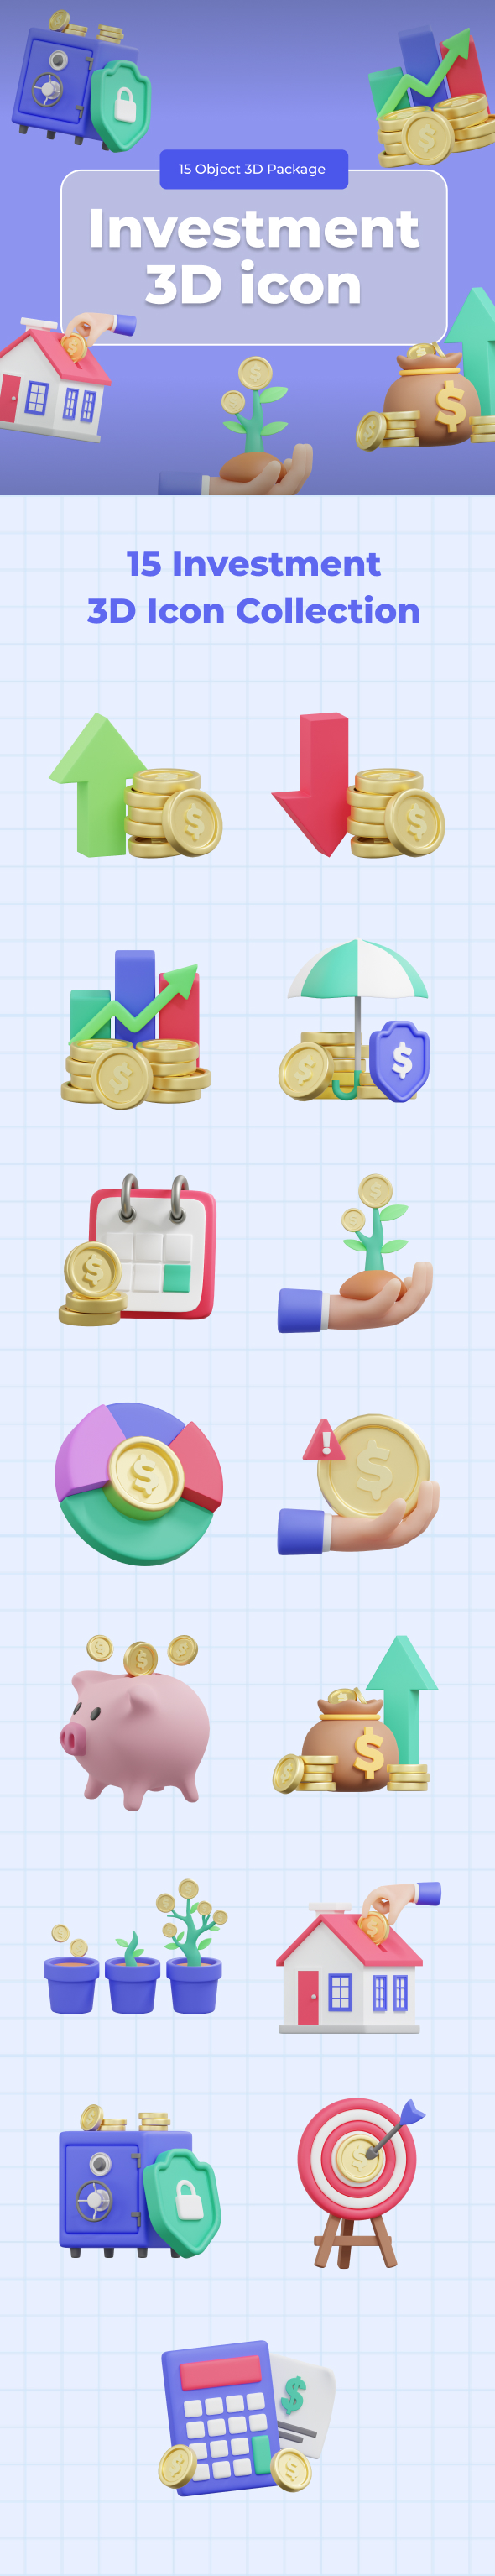 Investment 3D Icon Set